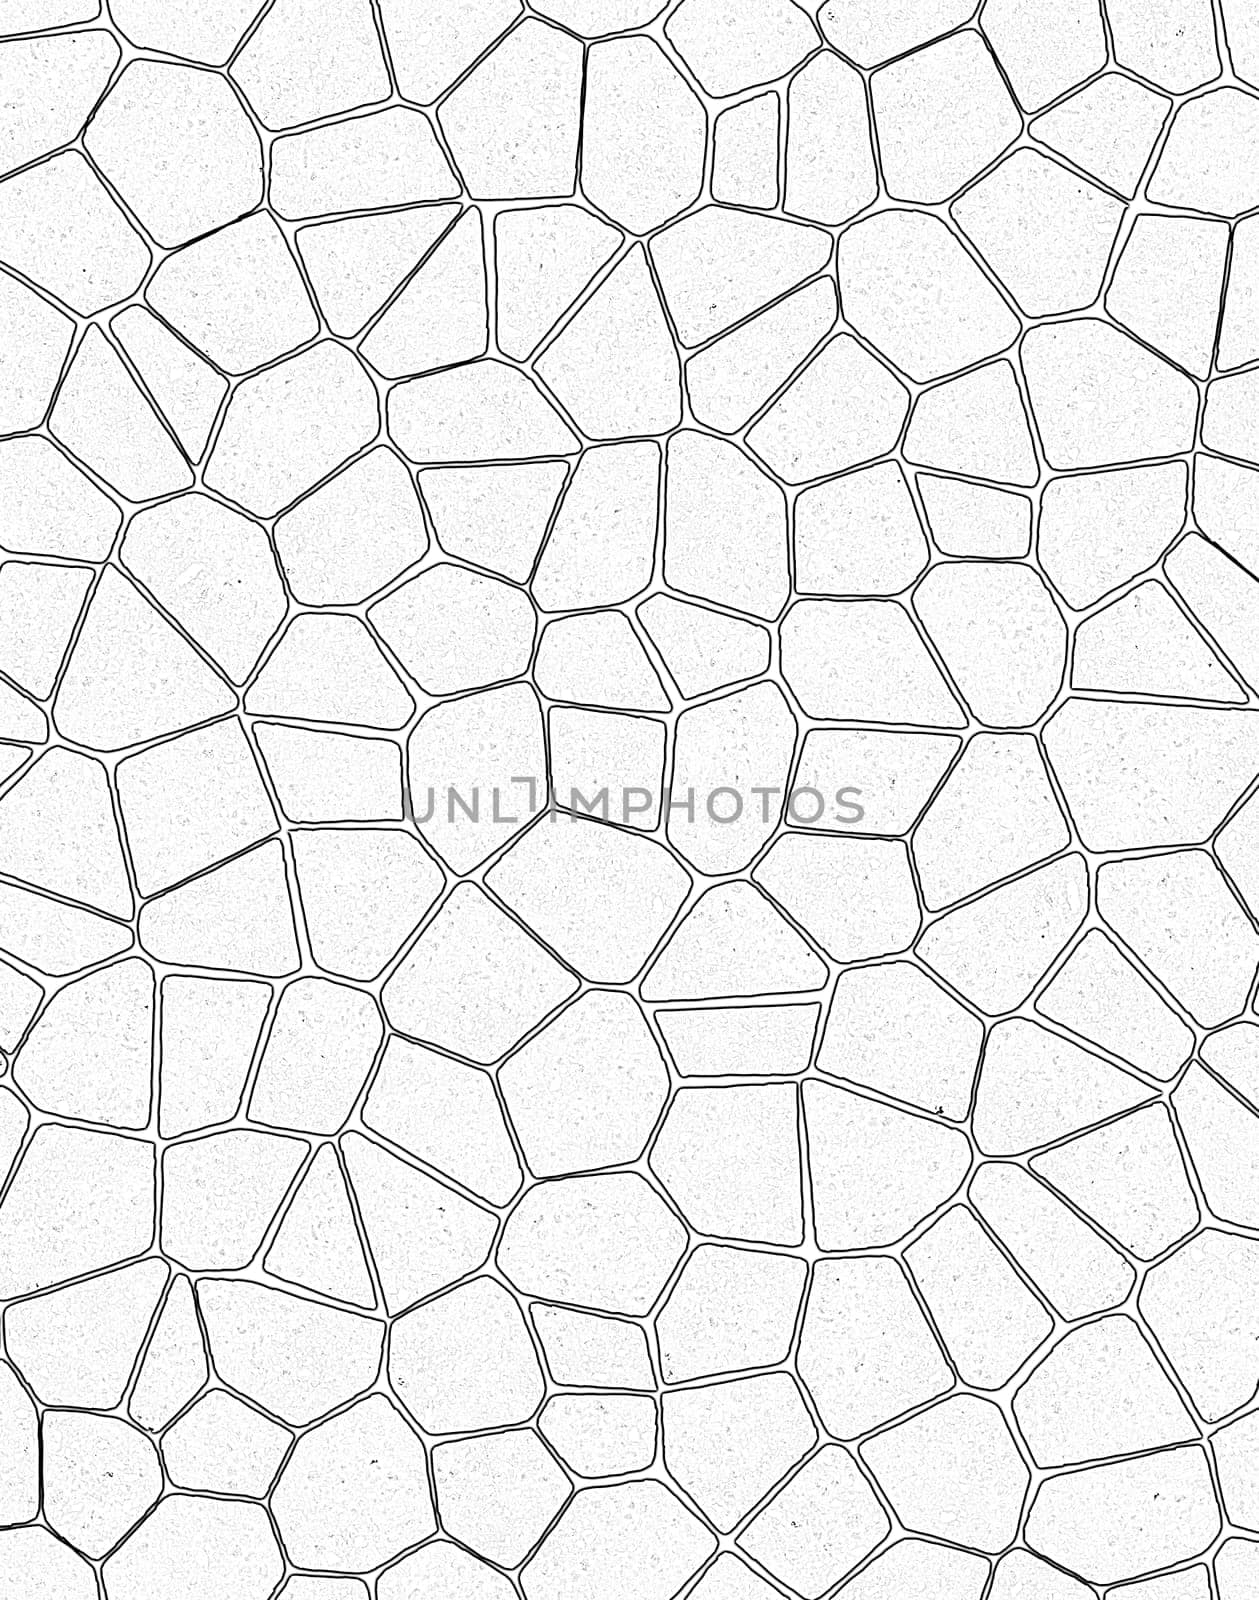 Abstract background with uneven oval fragments of white color by Mastak80